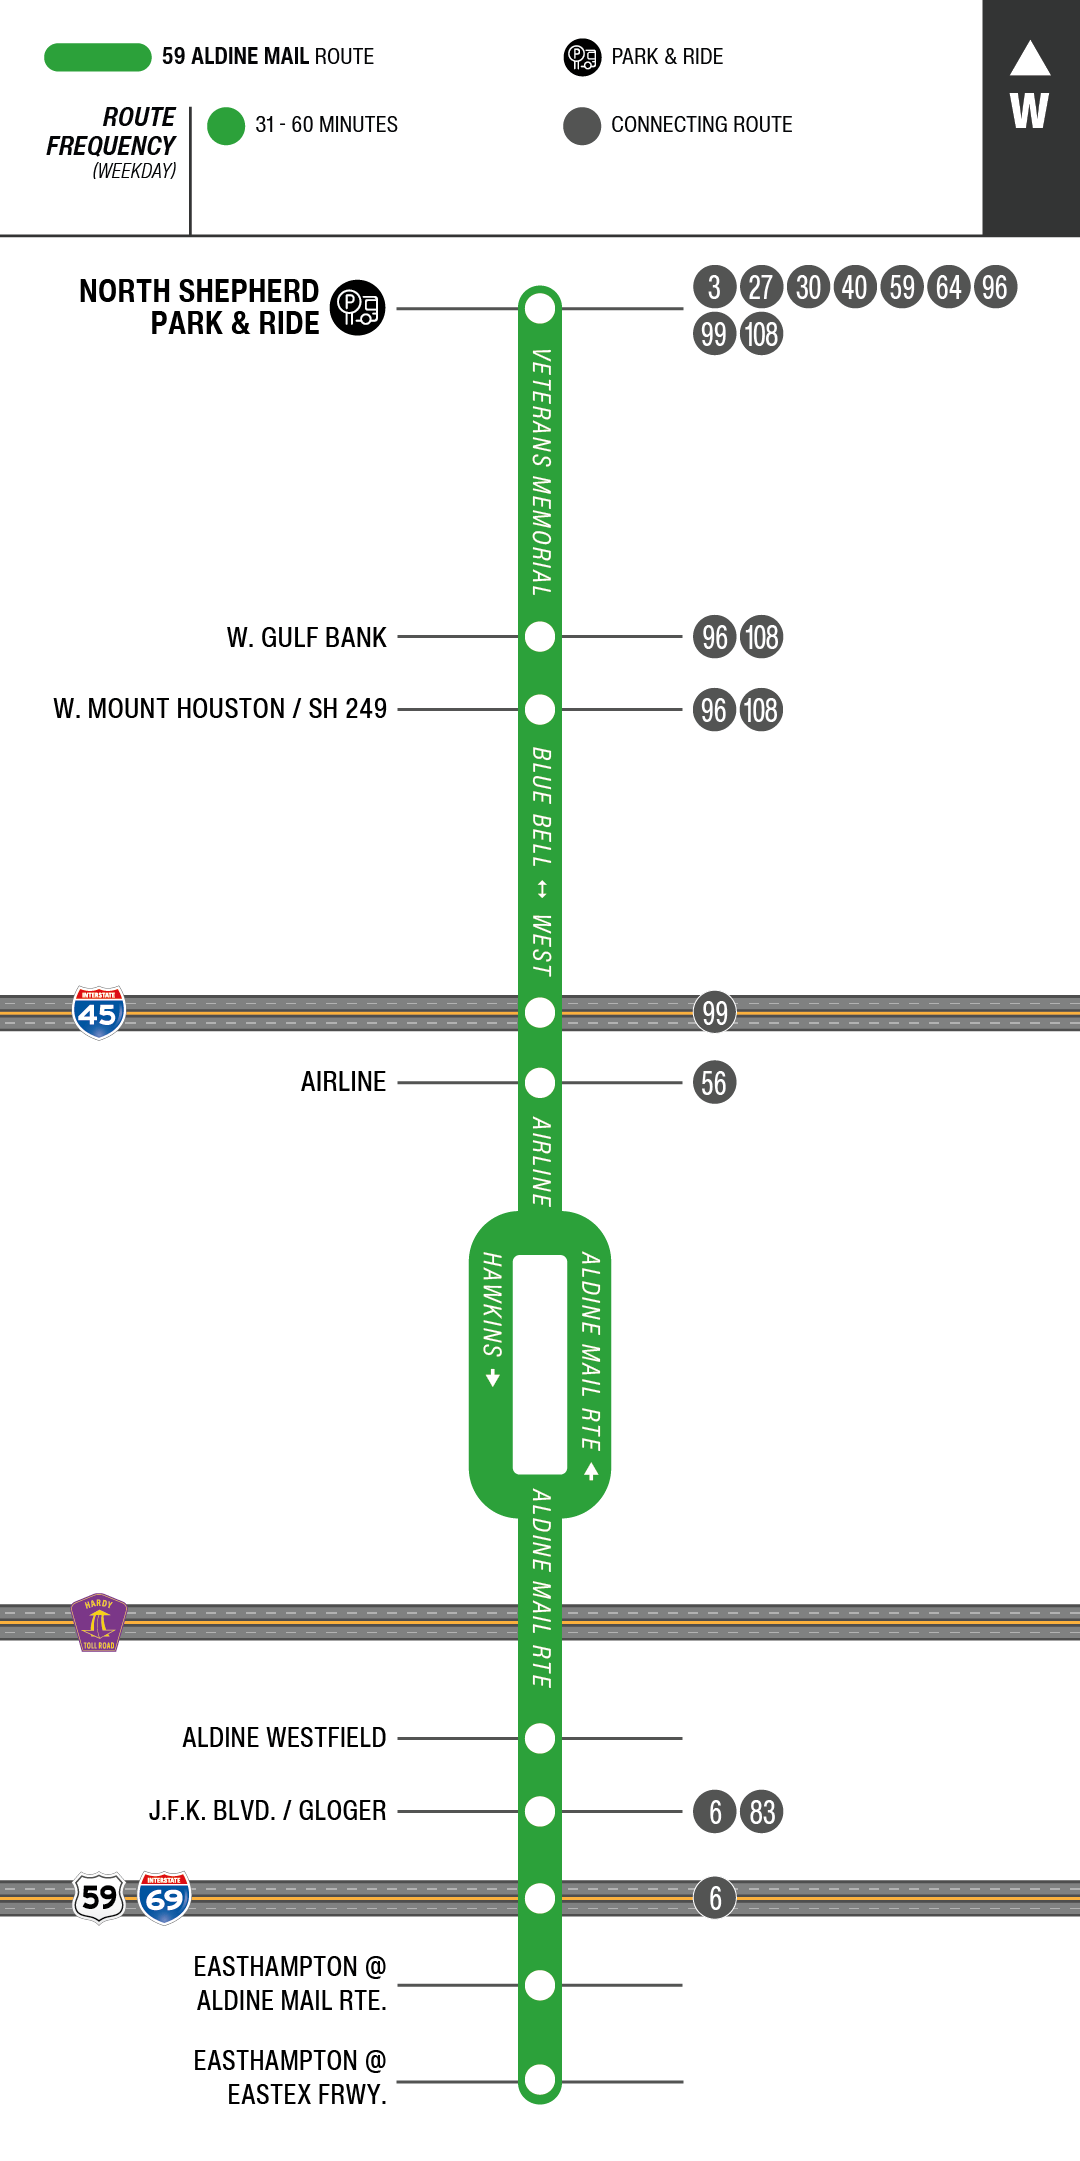 Route map for 59 Aldine Mail bus